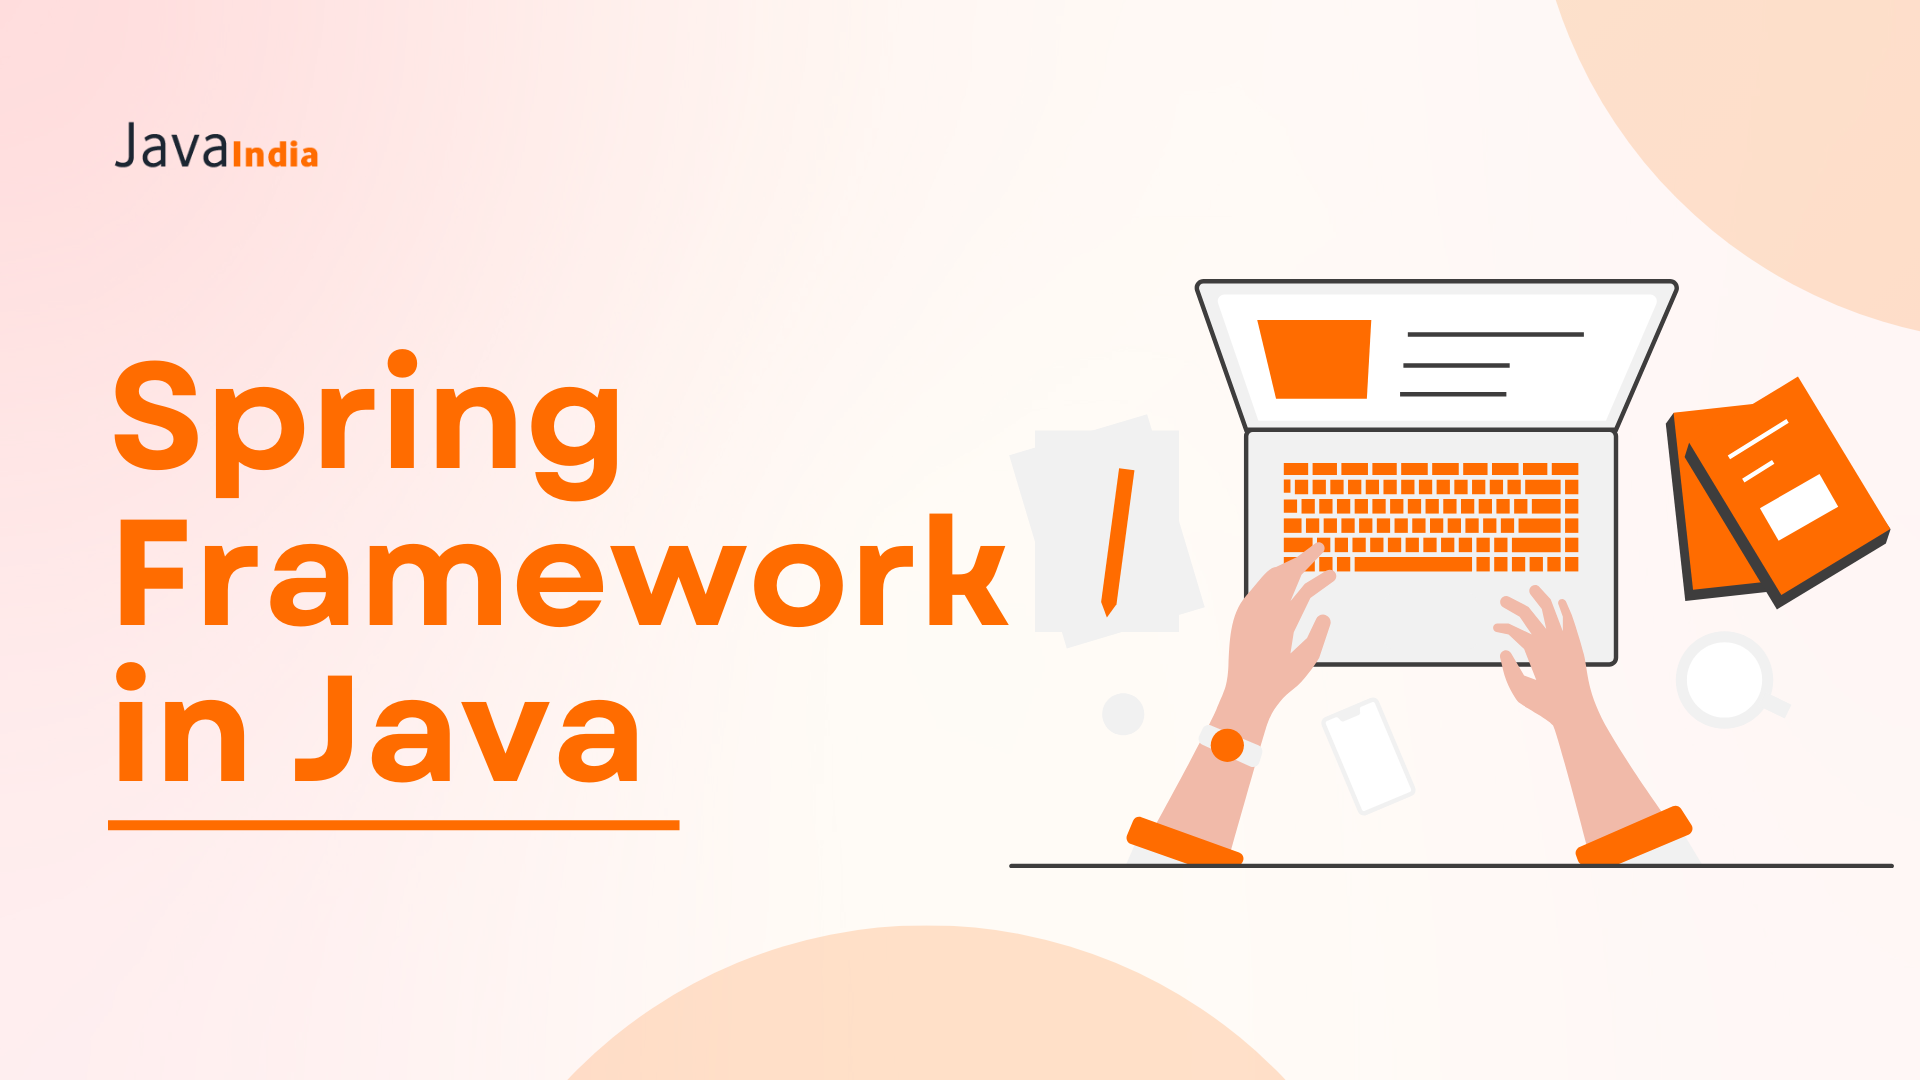 Spring Framework in Java: A Road to Have a Performant Website